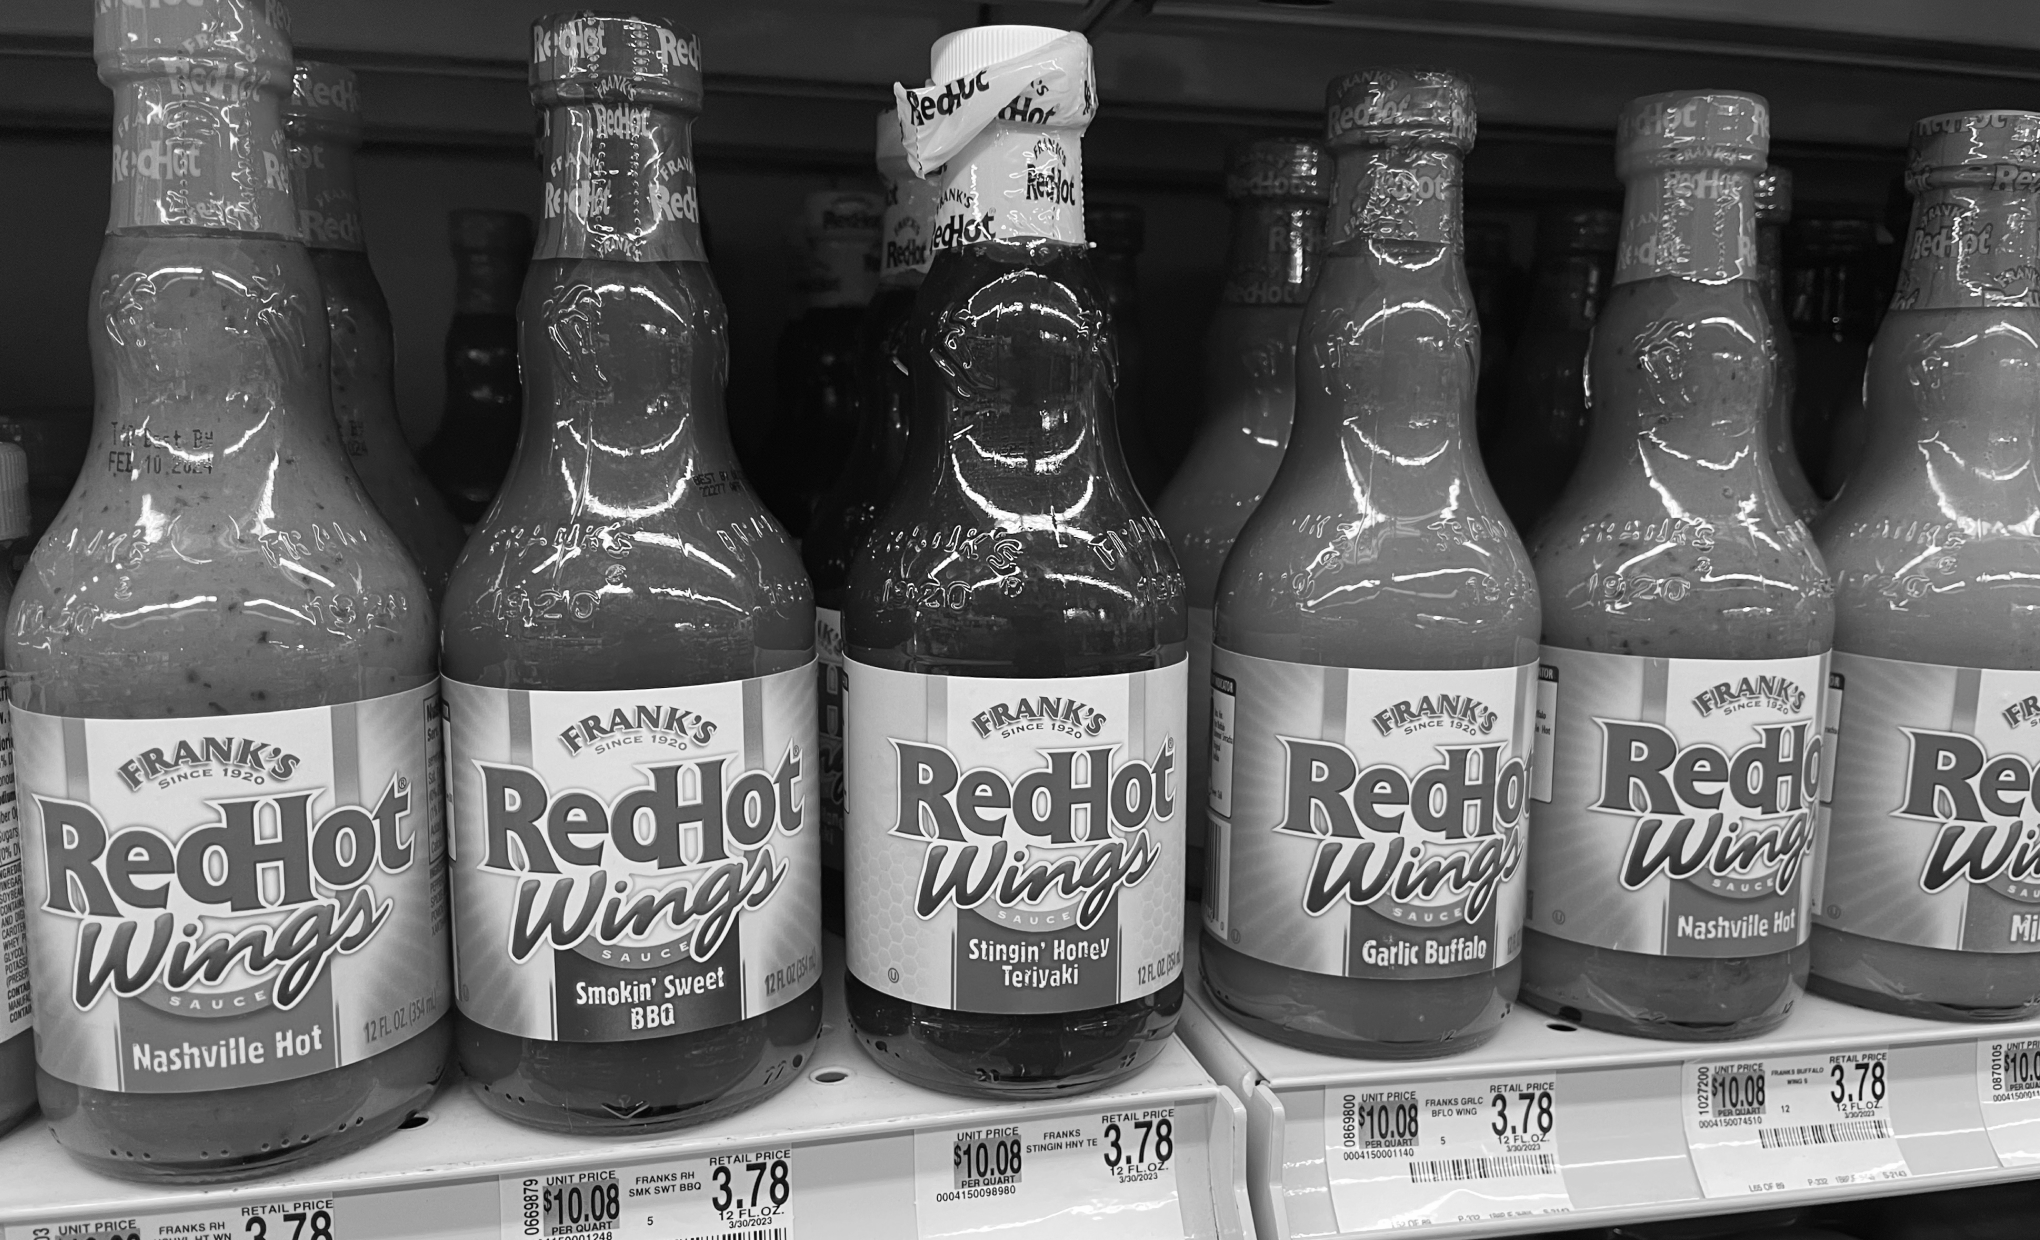 The History of Frank’s RedHot